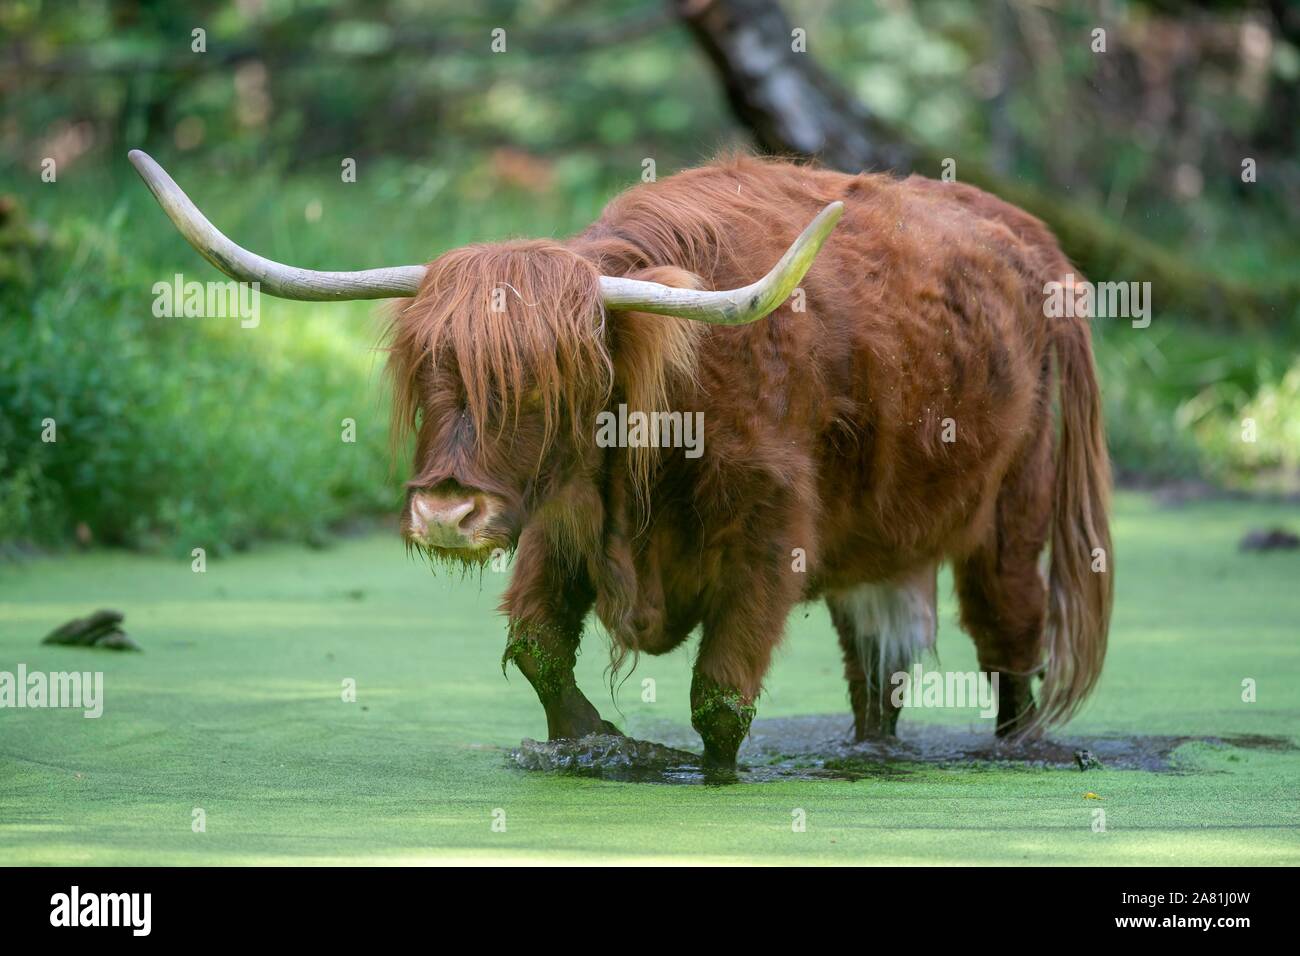 Highland cattle (Bos taurus) runs through water with duckweeds, Germany Stock Photo